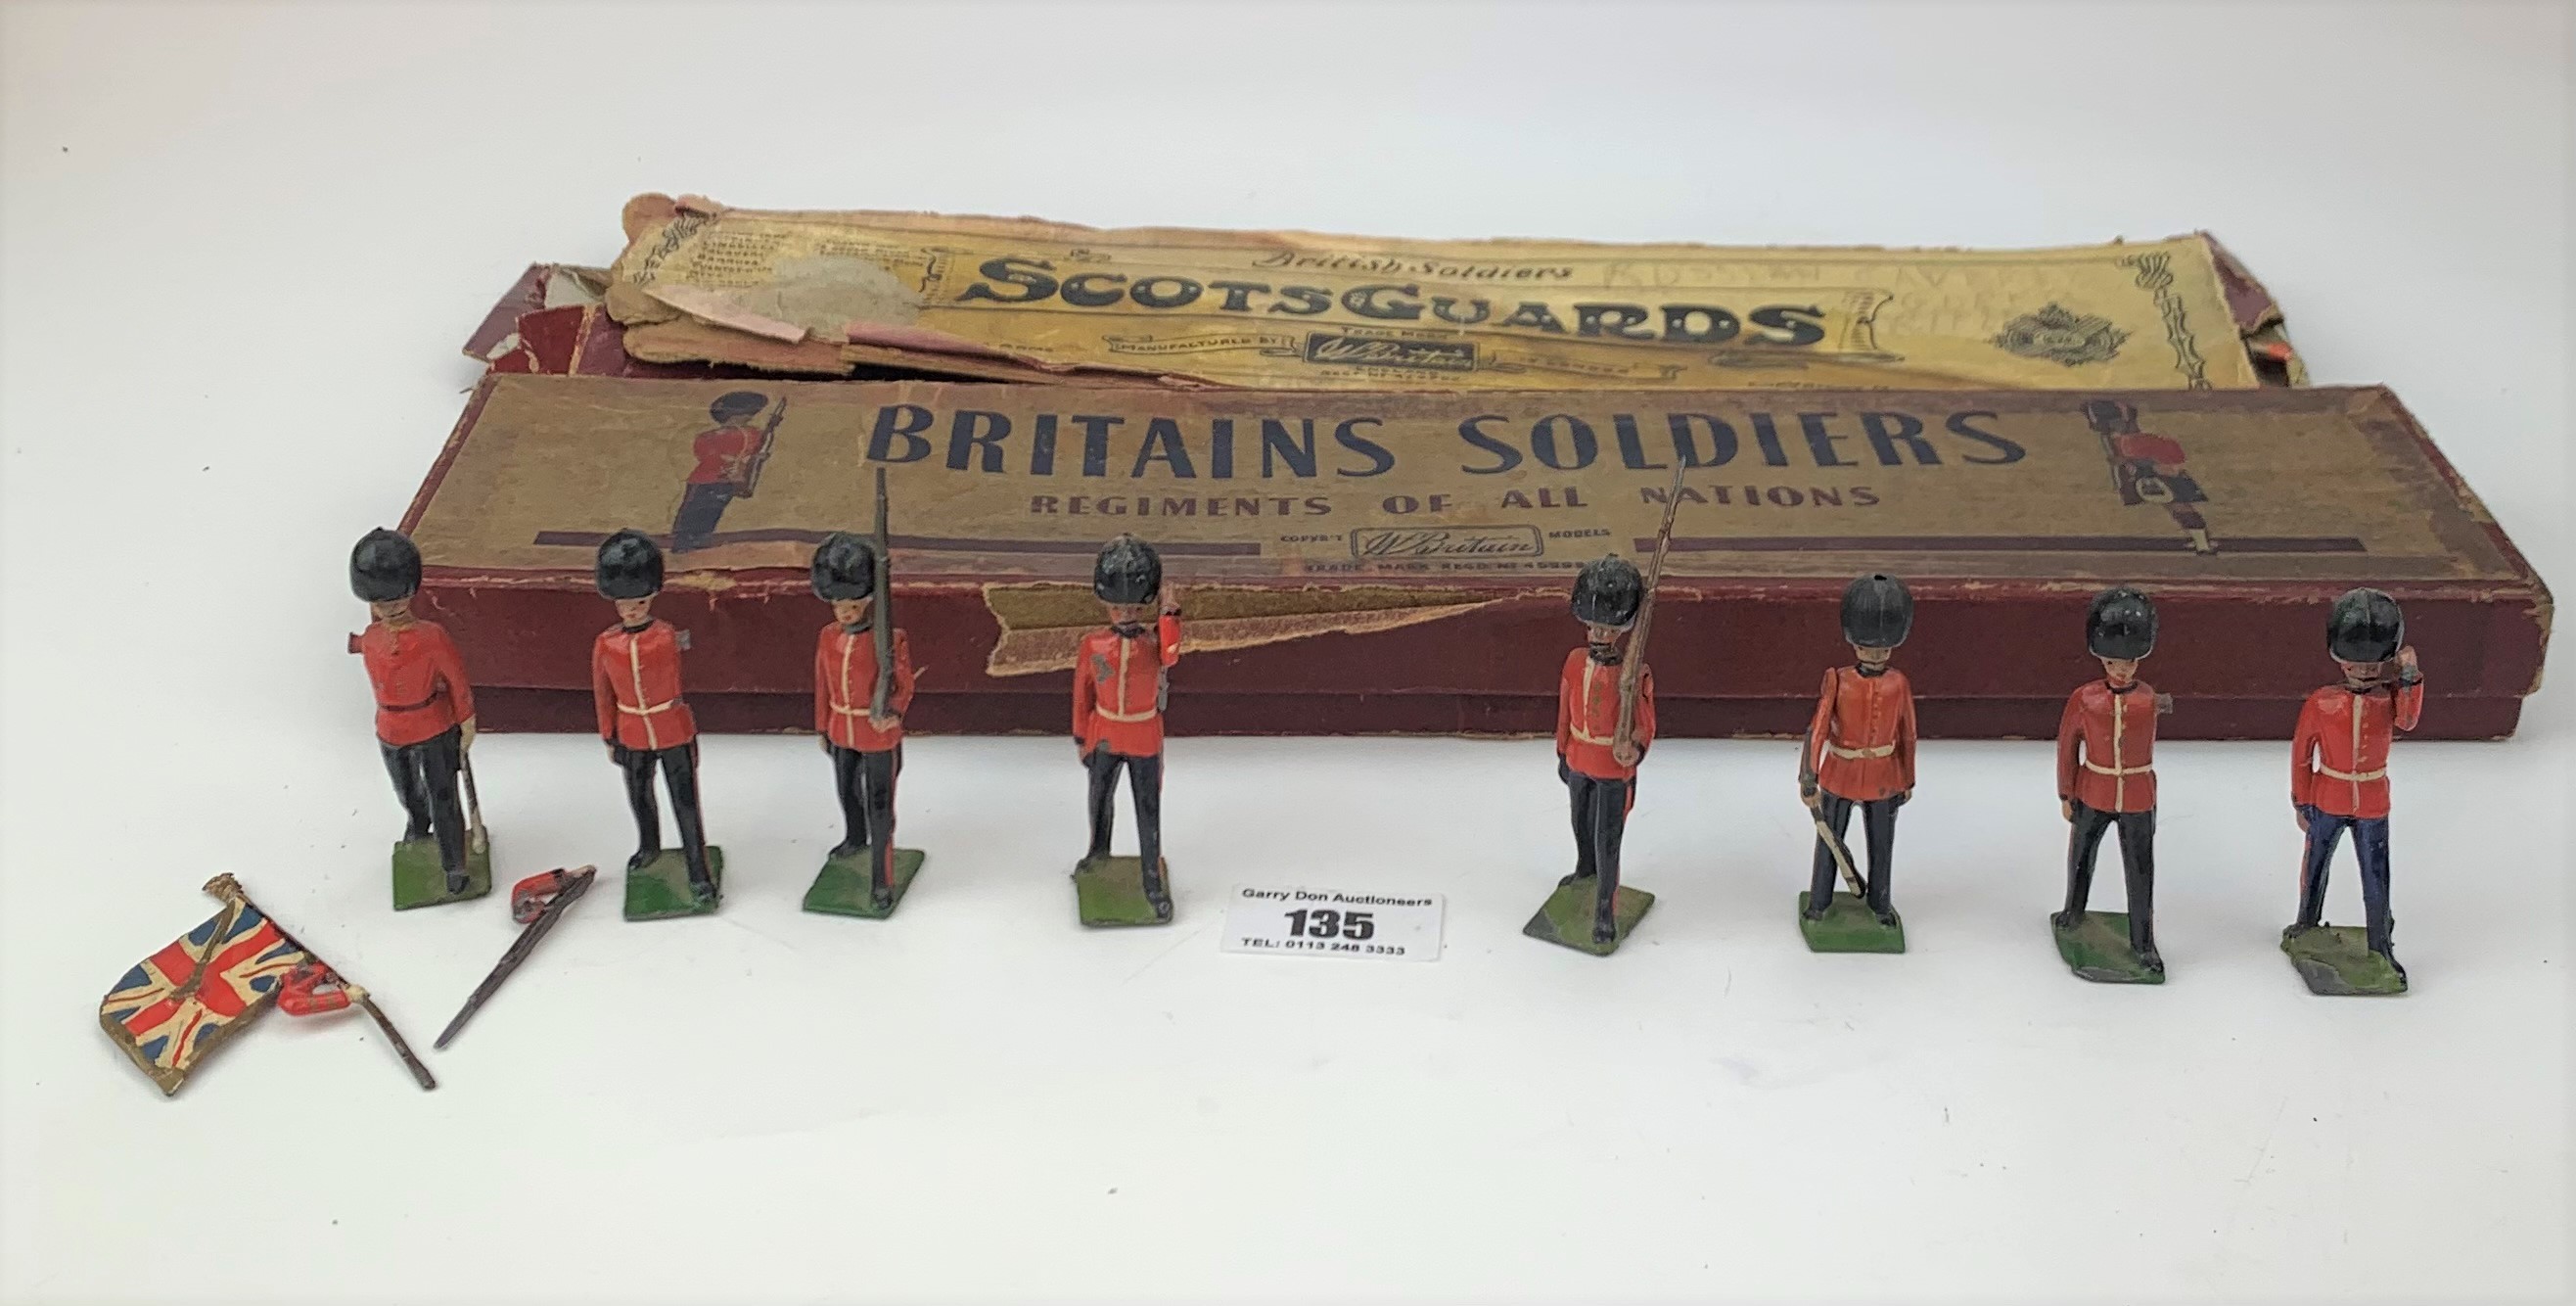 Boxed Britains Soldiers, Regiments of All Nations – Colours & Pioneers of the Scots Guards no. 82 - Image 8 of 10